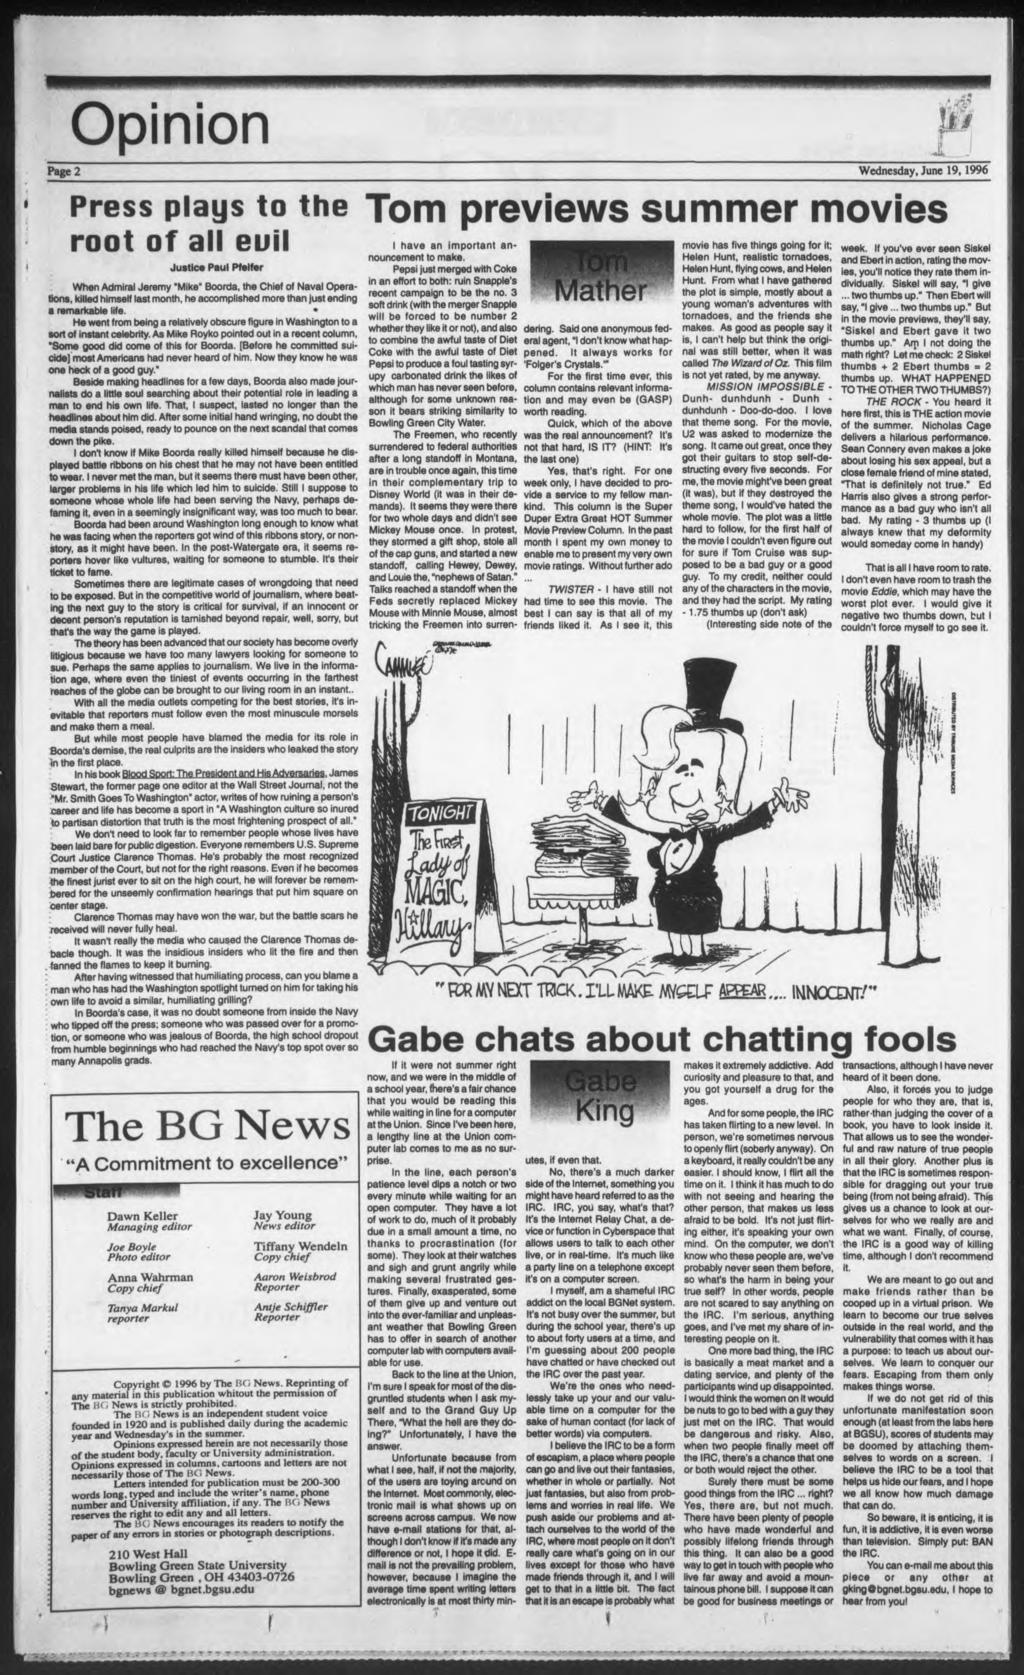 Opnon X Page 2 Wednesday, June 19,1996 Press plays to the Tom prevews summer moves root of all eul Justce Paul Pfelfer When Admral Jeremy "Mke" Boorda, the Chef of Naval Operatons, klled hmself last